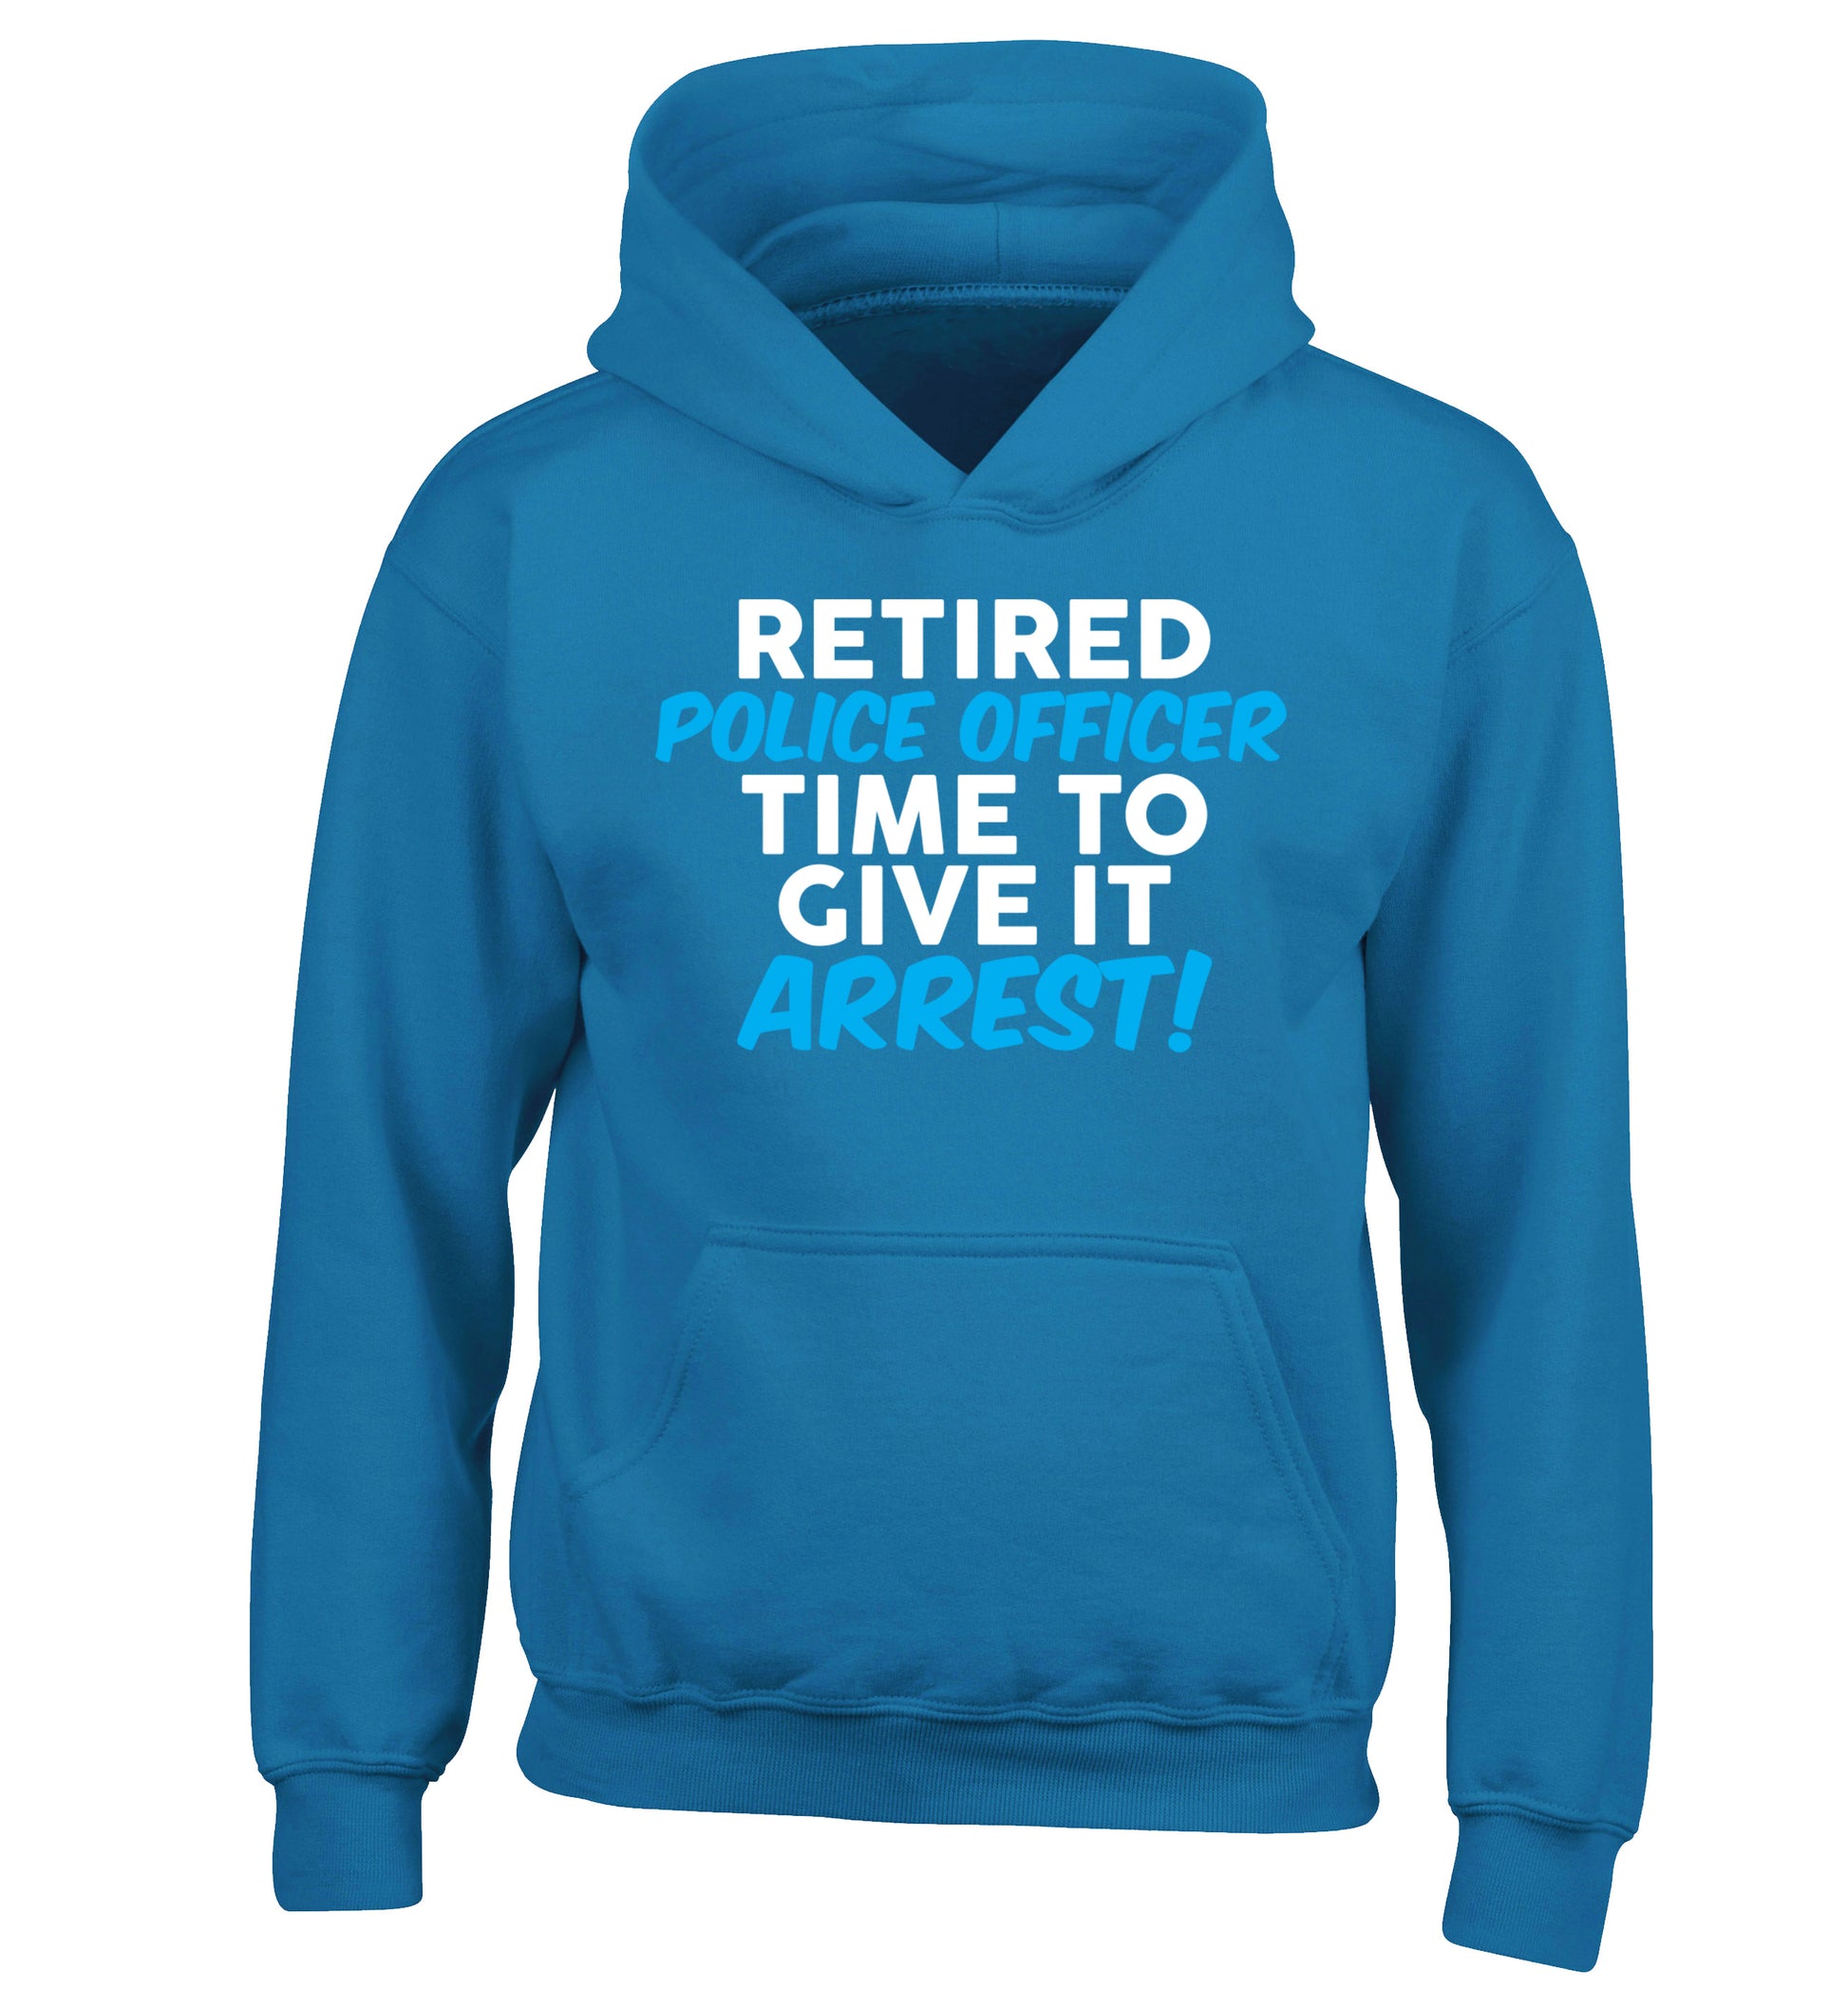 Retired police officer time to give it arrest children's blue hoodie 12-13 Years